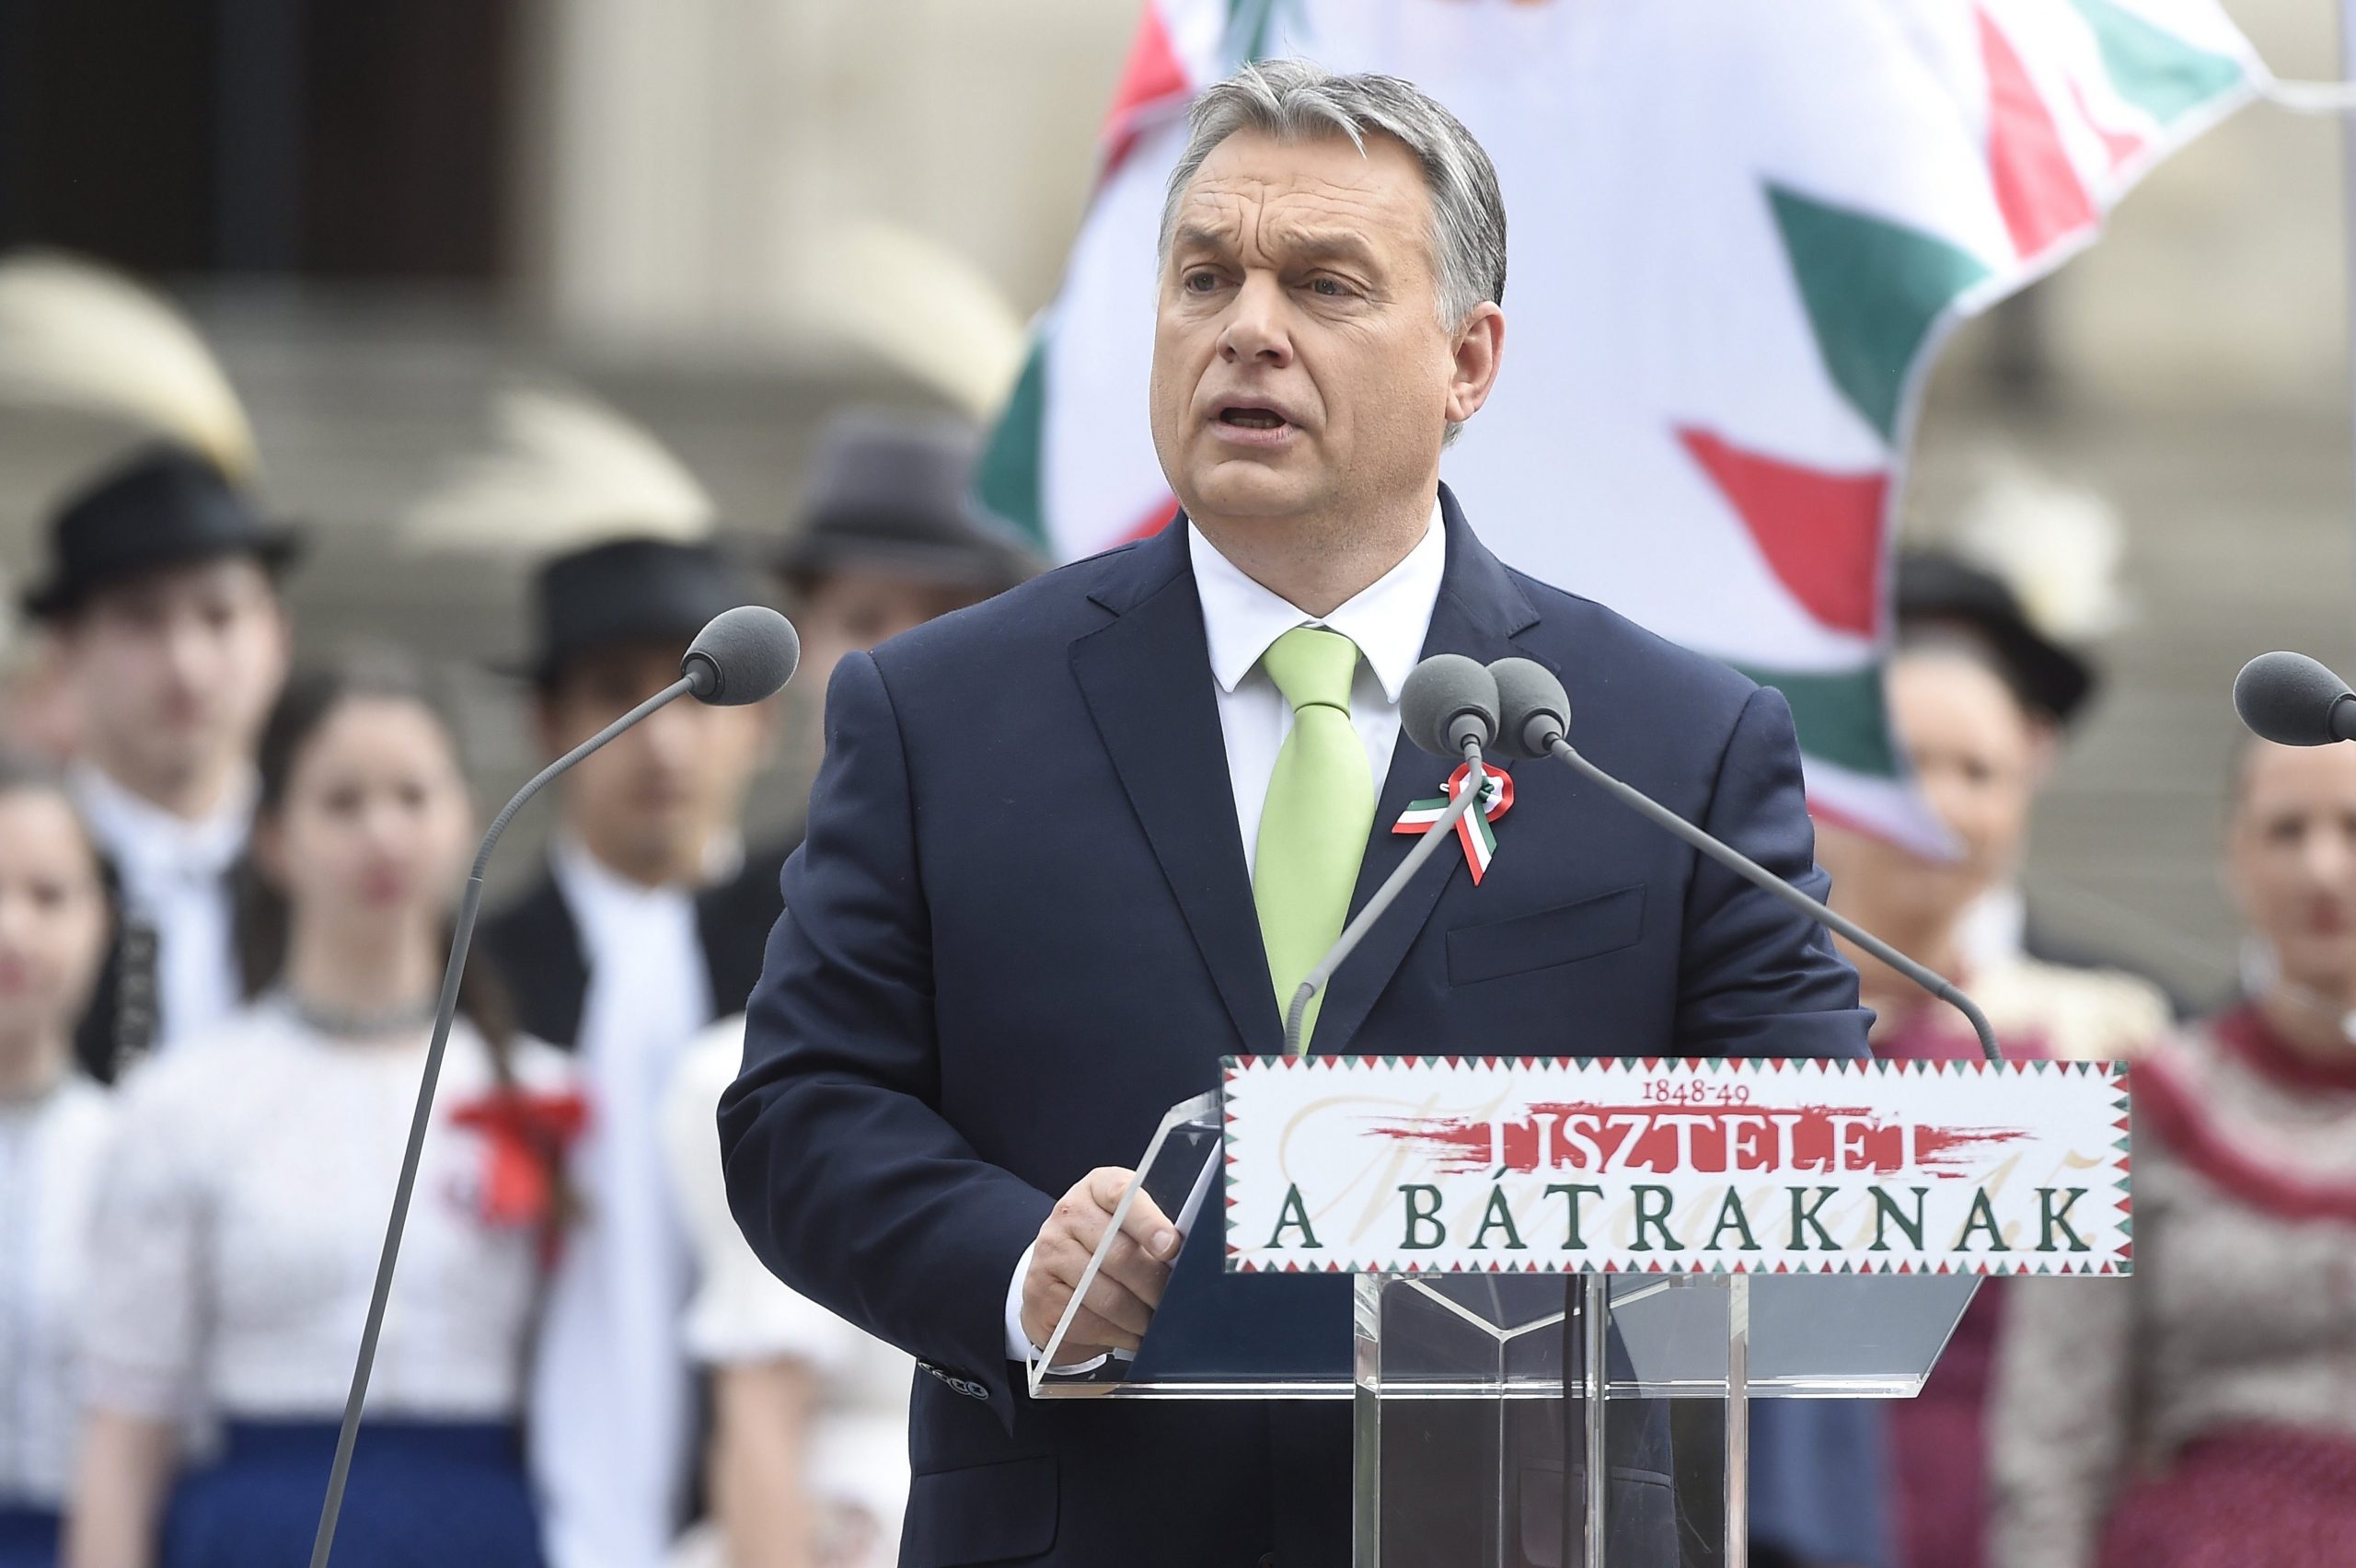 March 15 - PM Orbán: 'We Face a Renewed Wave of Attack by an Invisible Enemy'